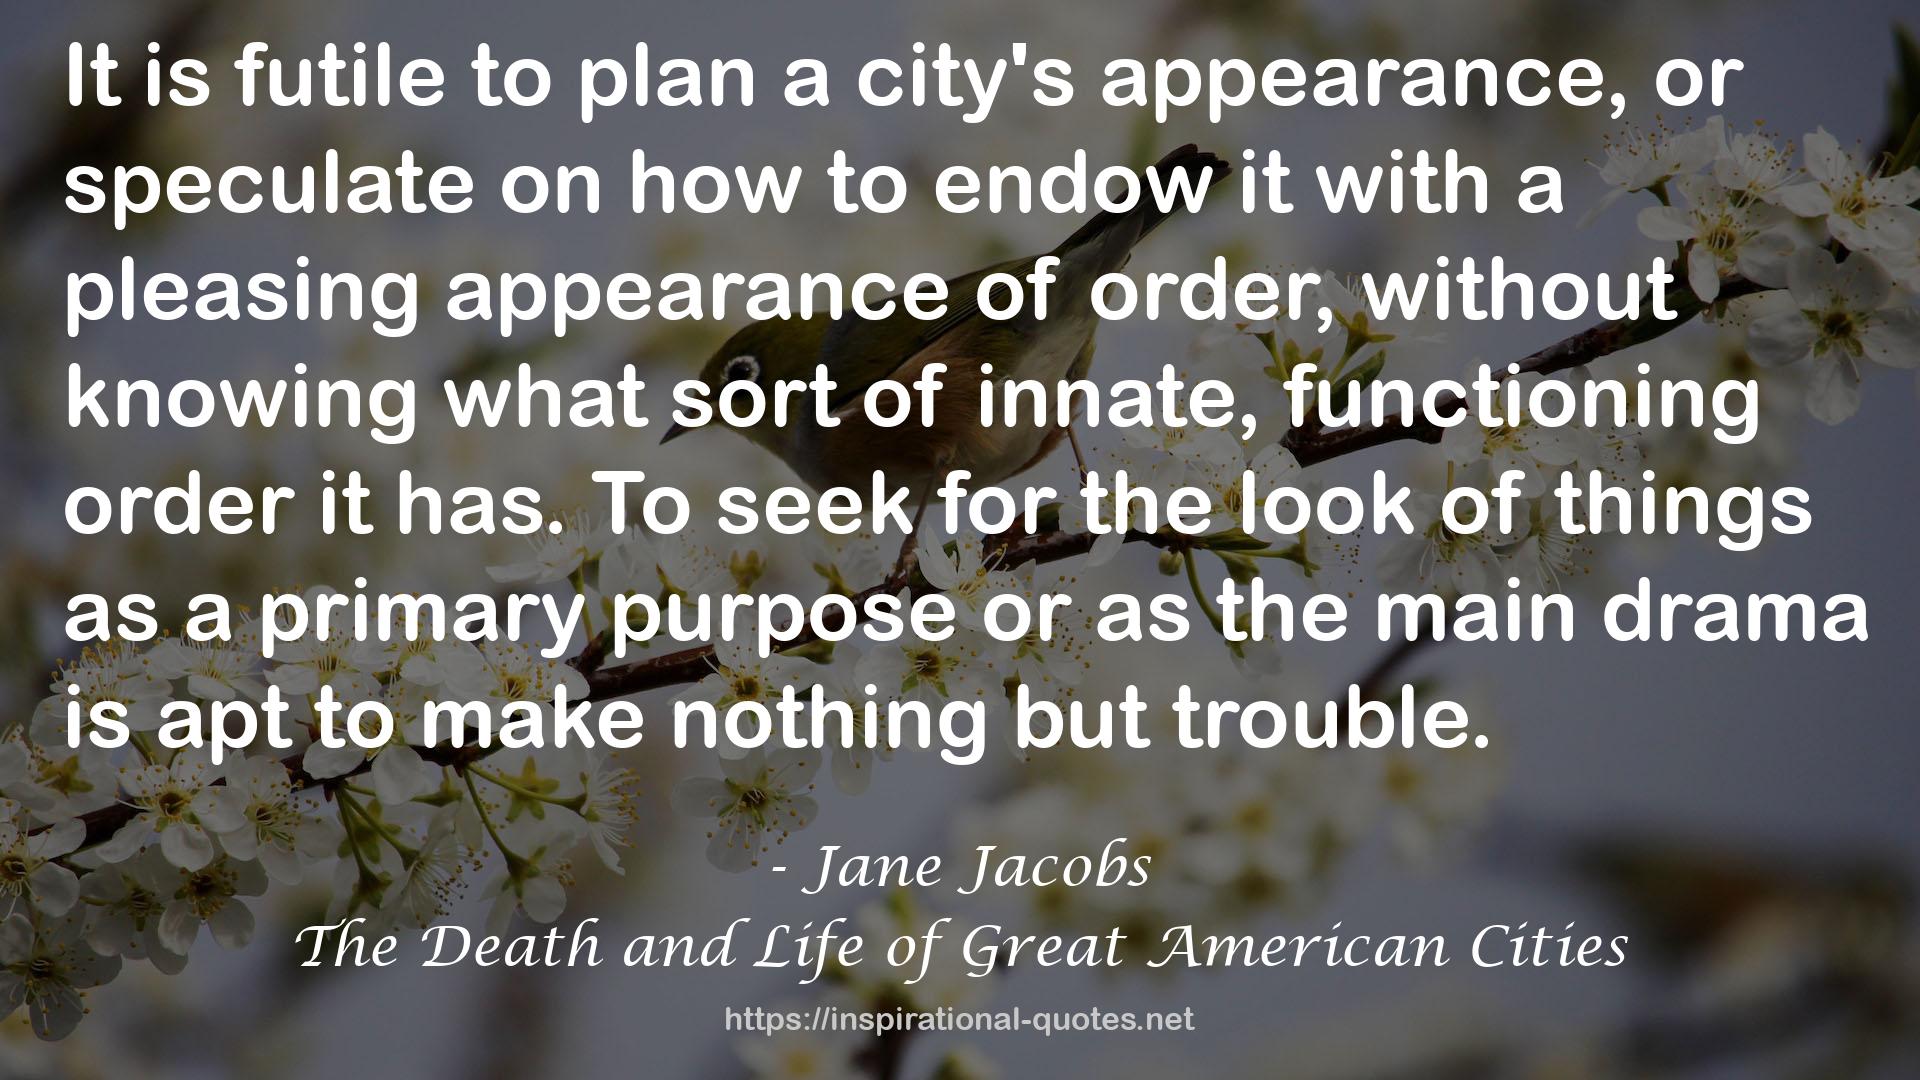 The Death and Life of Great American Cities QUOTES